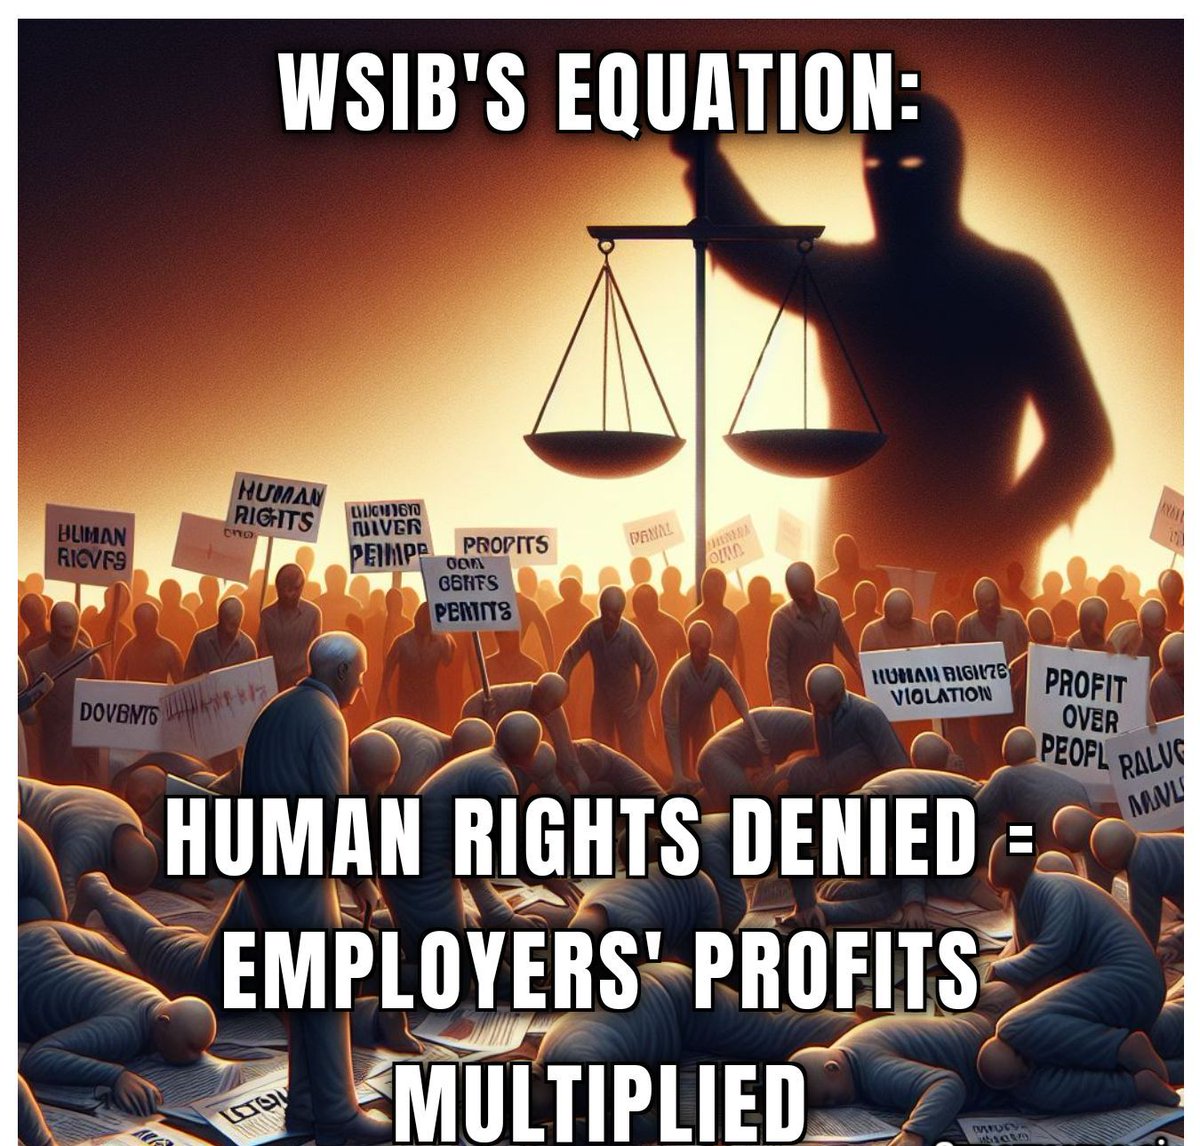 WSIB's equation: human rights denied = employers' profits multiplied.
 Let's rewrite this equation to prioritize people over profits! #InjuredWorkers #HumanRights #FairTreatment